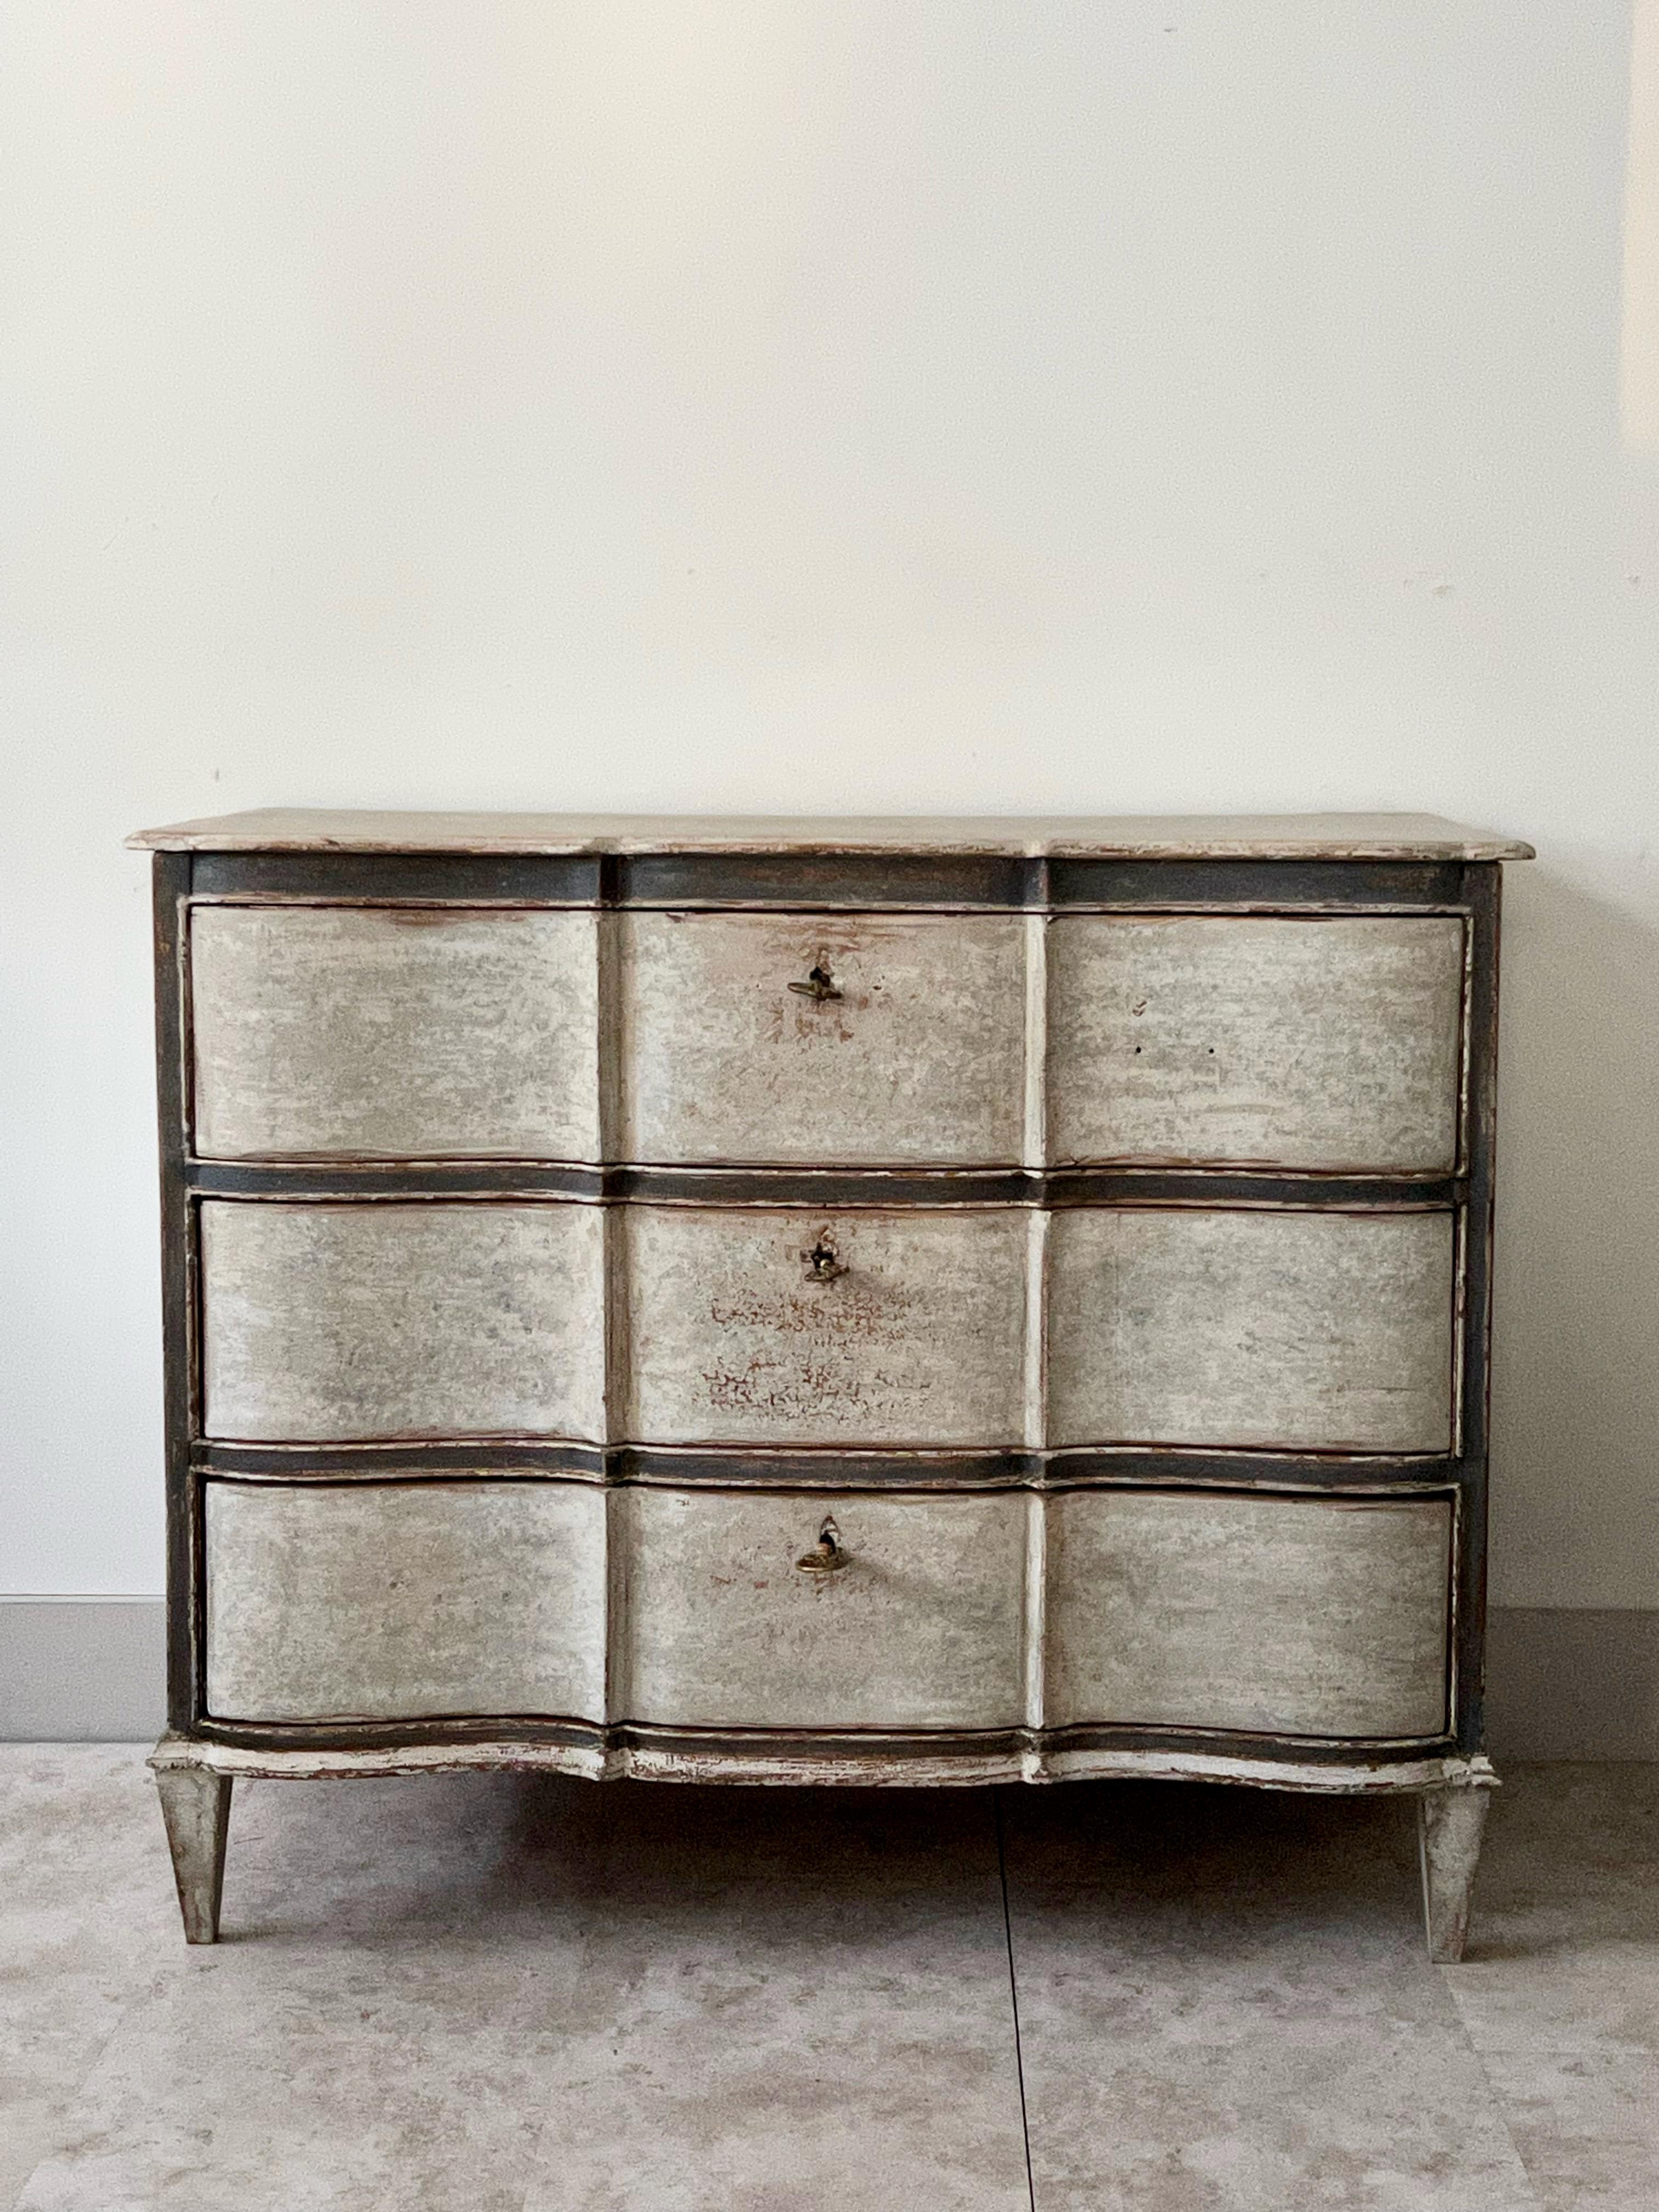 18th Century chest of drawer from Baroque period in style of 